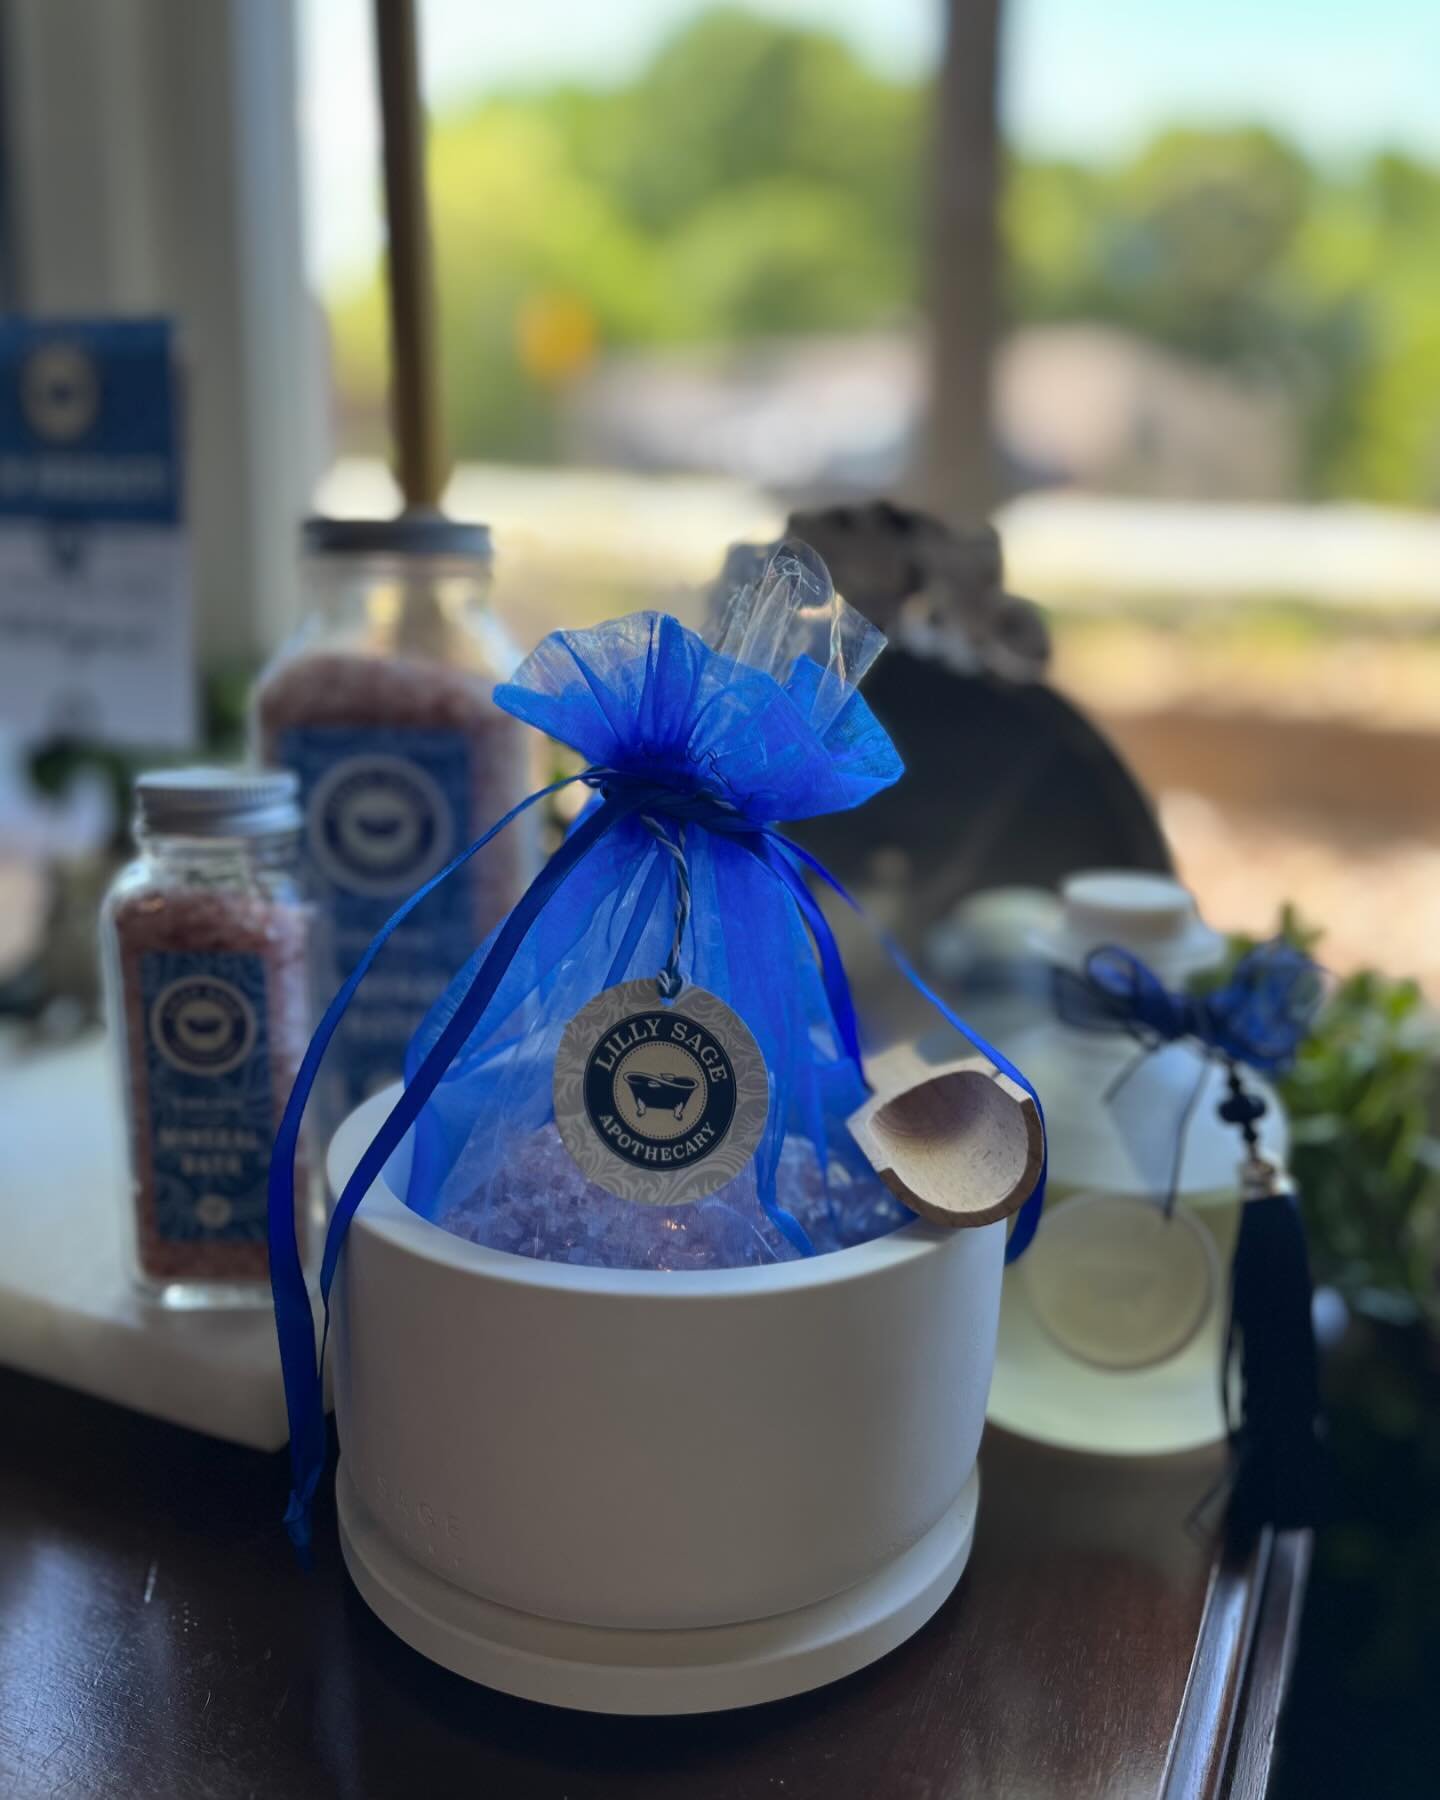 ✨End of the school year is quickly approaching, let&rsquo;s remember those teachers and drivers who take care of our precious kids! 
We have just the right gift for that special person-how about something from our luxurious bath collection?💙💙💙

#l